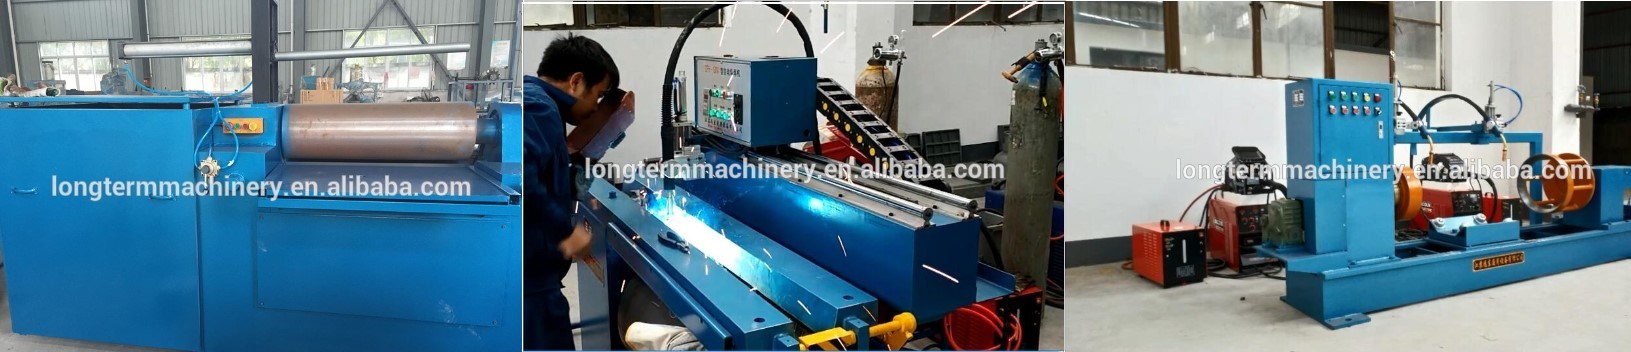 Automatic LPG Cylinder Handle Welding Machine with Mechanical Arms